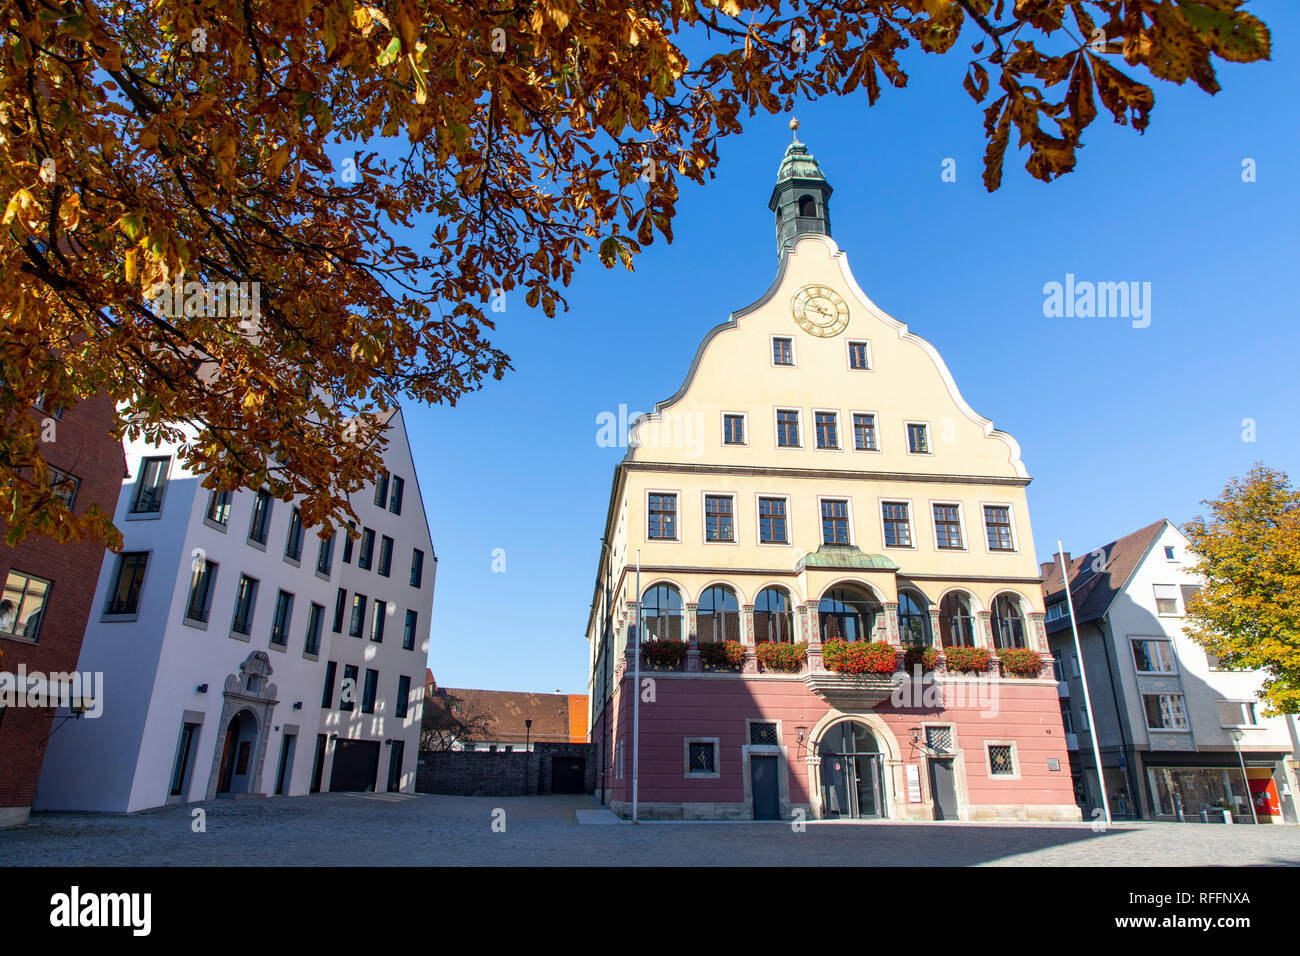 Ulm, old town, the Schwšrhaus, at the Weinhof, today house of the city history Ulm, Germany Stock Photo